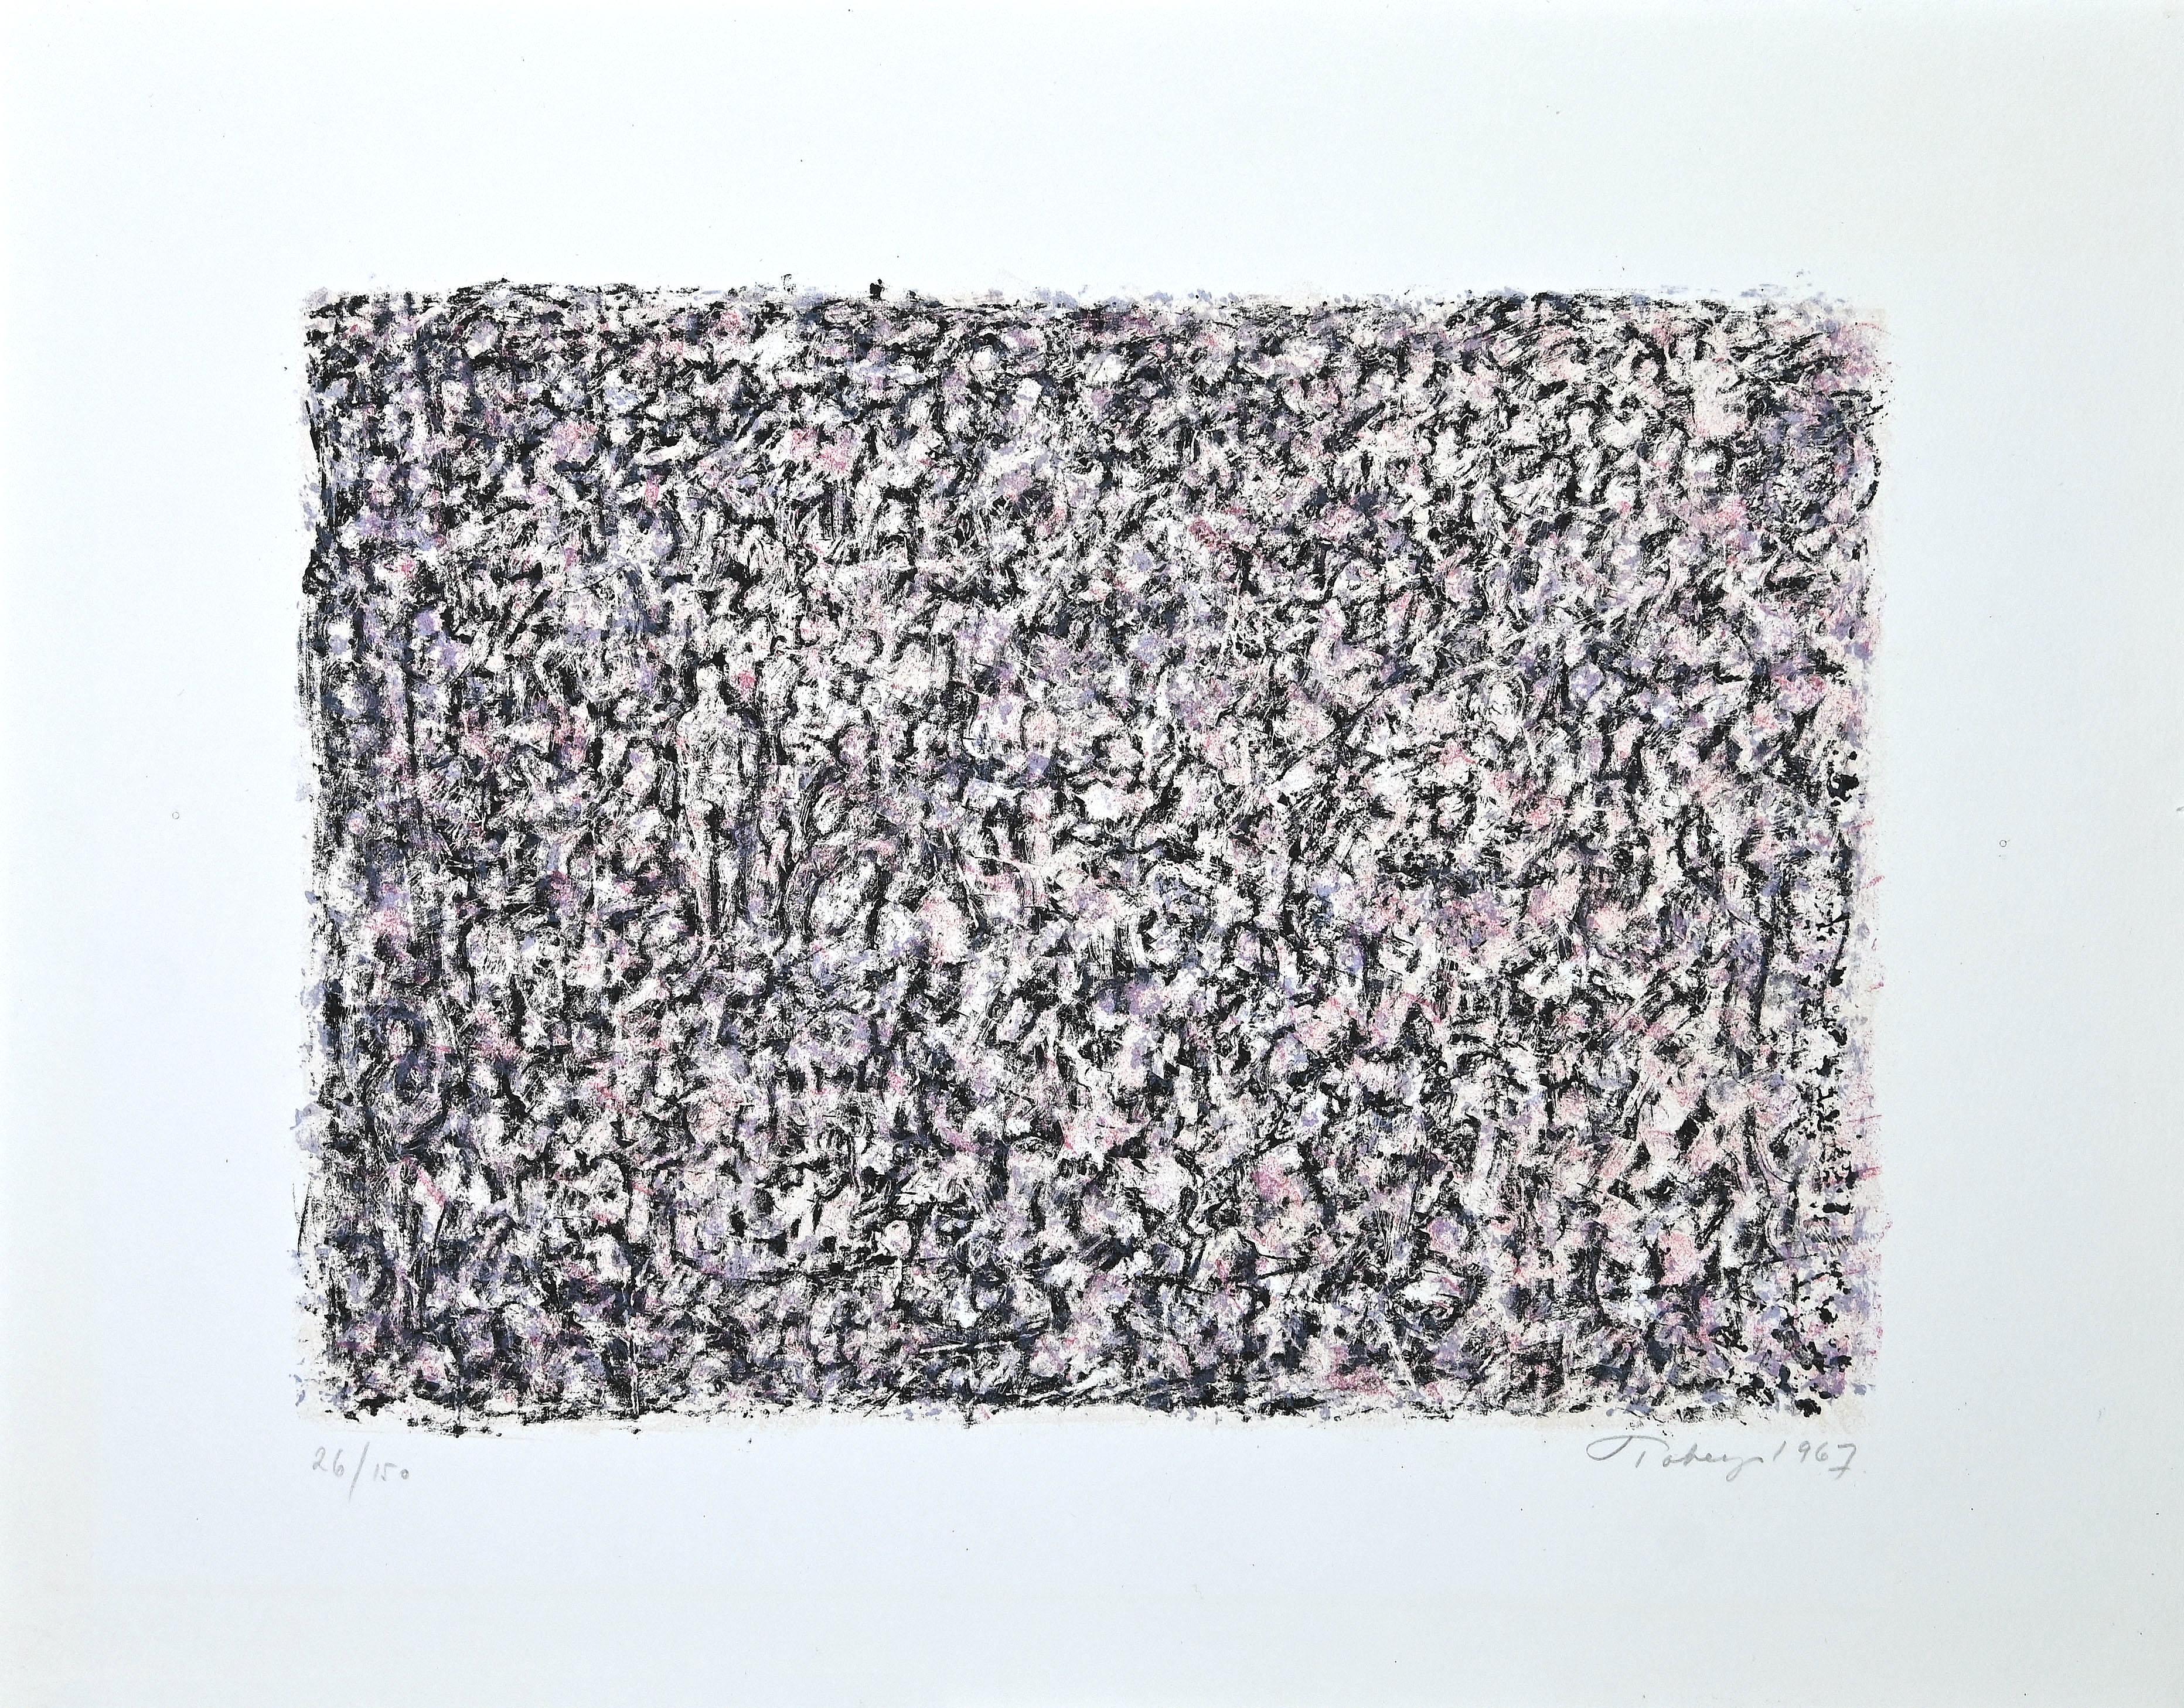 Horizontal Composition is a beautiful lithograph realized in 1967 by the artist, pioneer of Abstract Expressionism, Mark Tobey (1890 – 1976).

This original print is signed and numbered in pencil on the lower right margin: Tobey 1967.

Edition